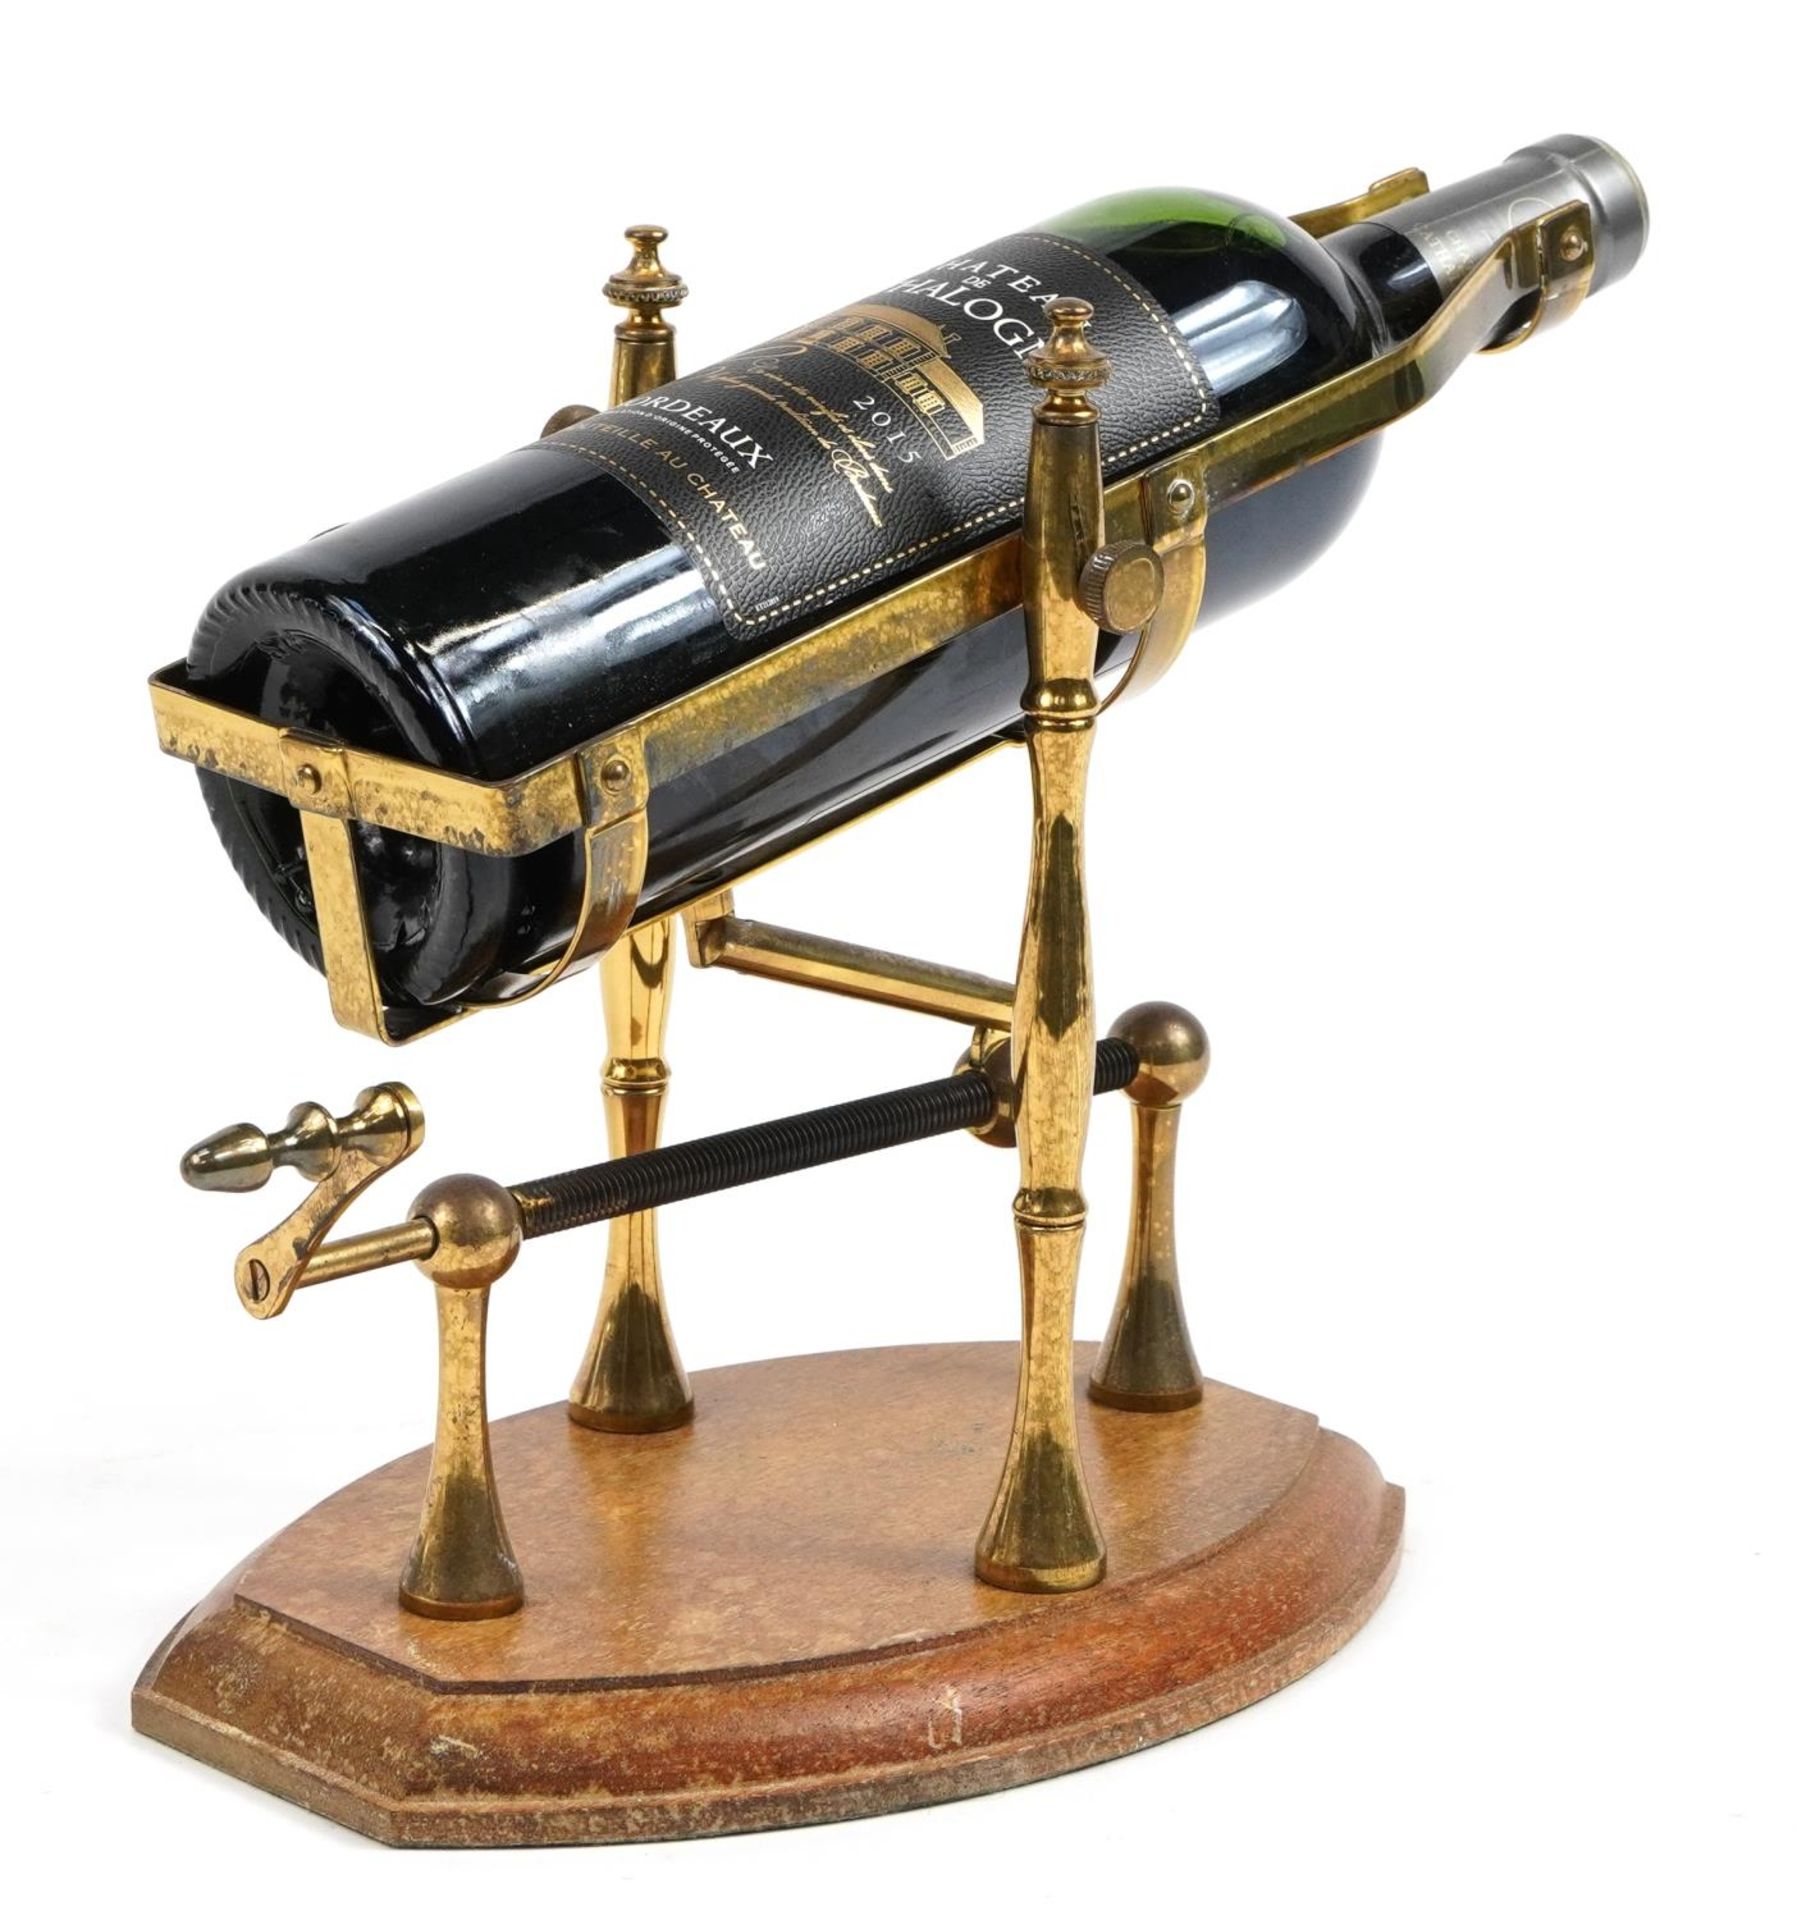 Brass mechanical action wine bottle stand/pourer on wooden base with a bottle of 2015 Chateau de - Image 2 of 4